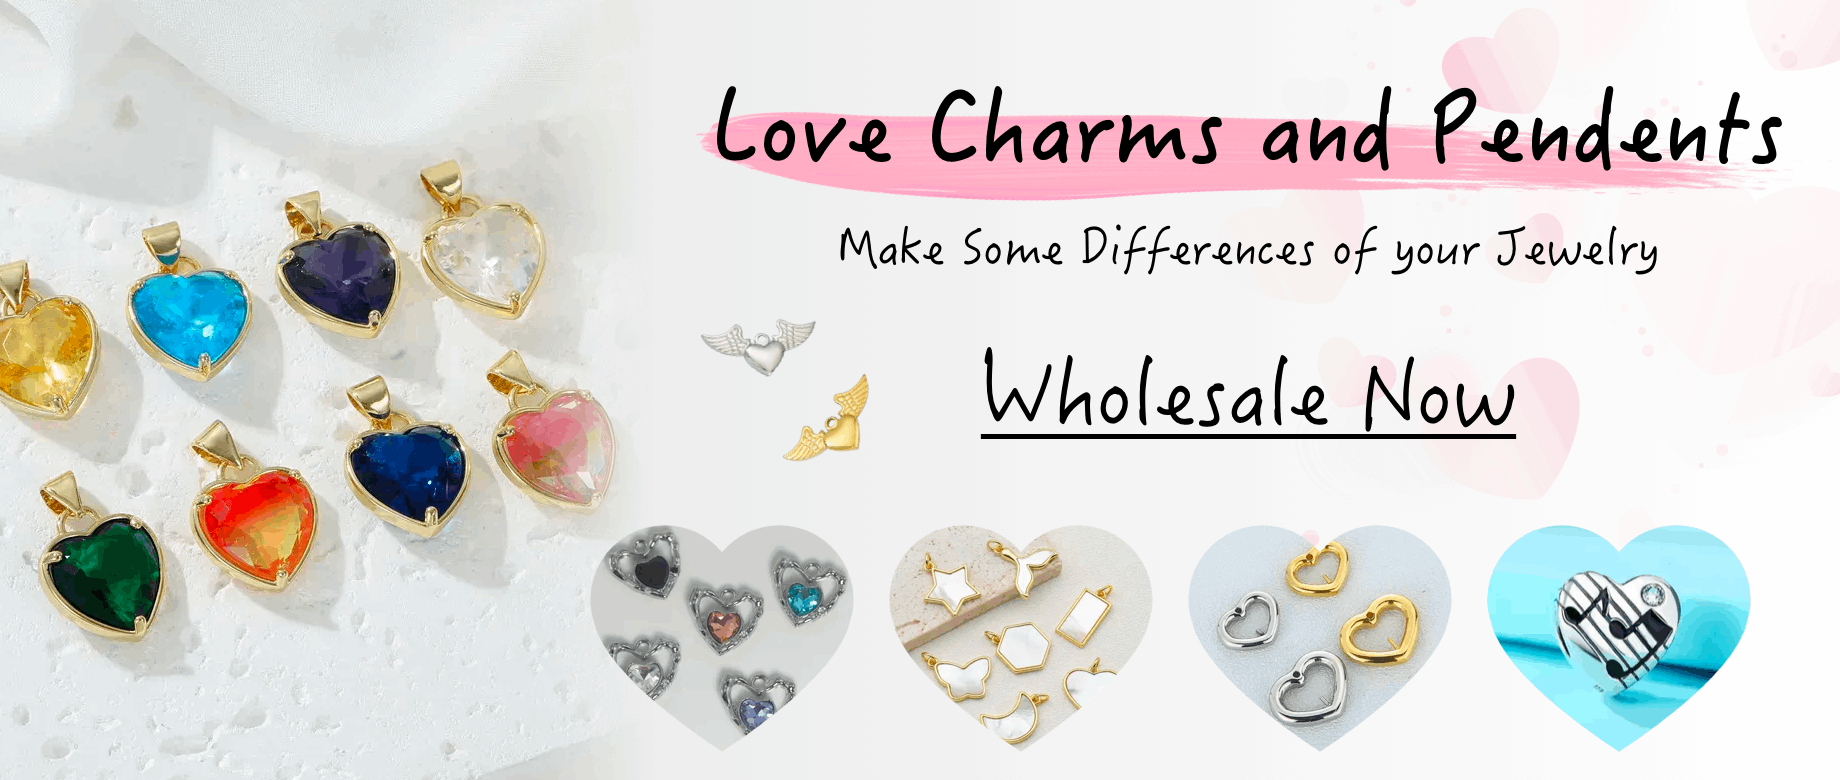 One-stop ordering wholesale love charms and enjoy the best customer service.